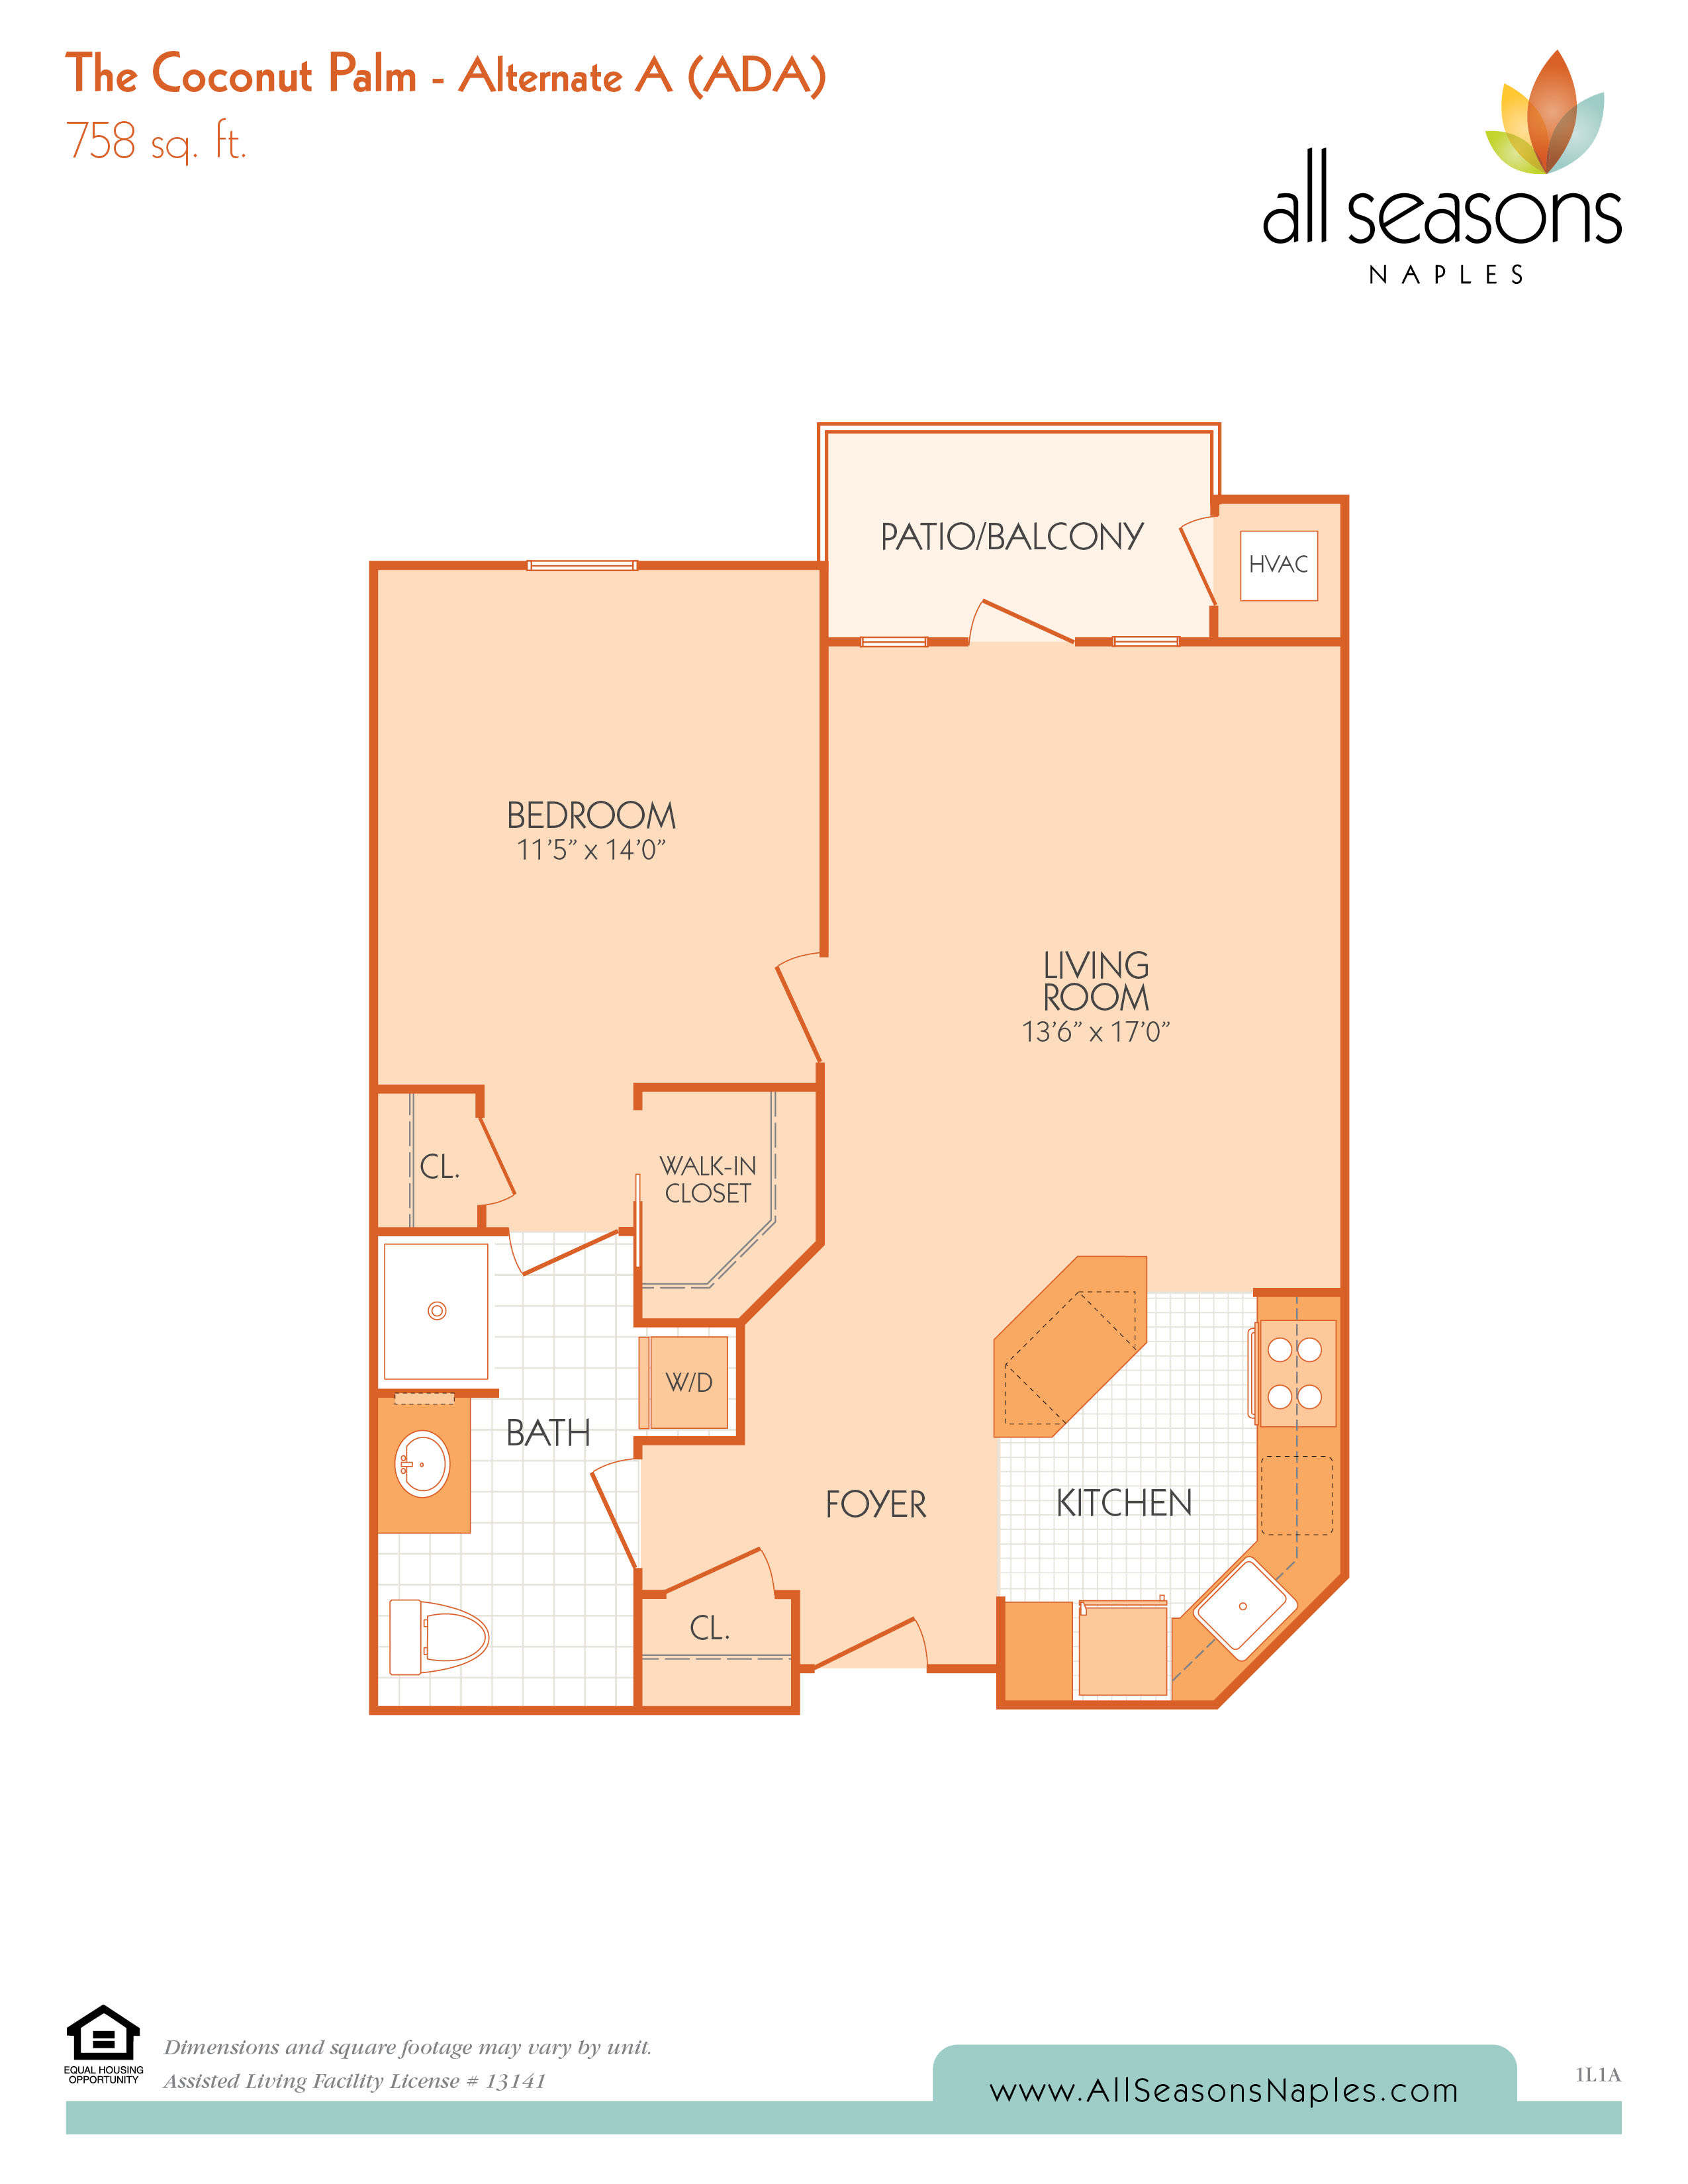 The Coconut Palm Alternate A floor plan at All Seasons Naples in Naples, Florida